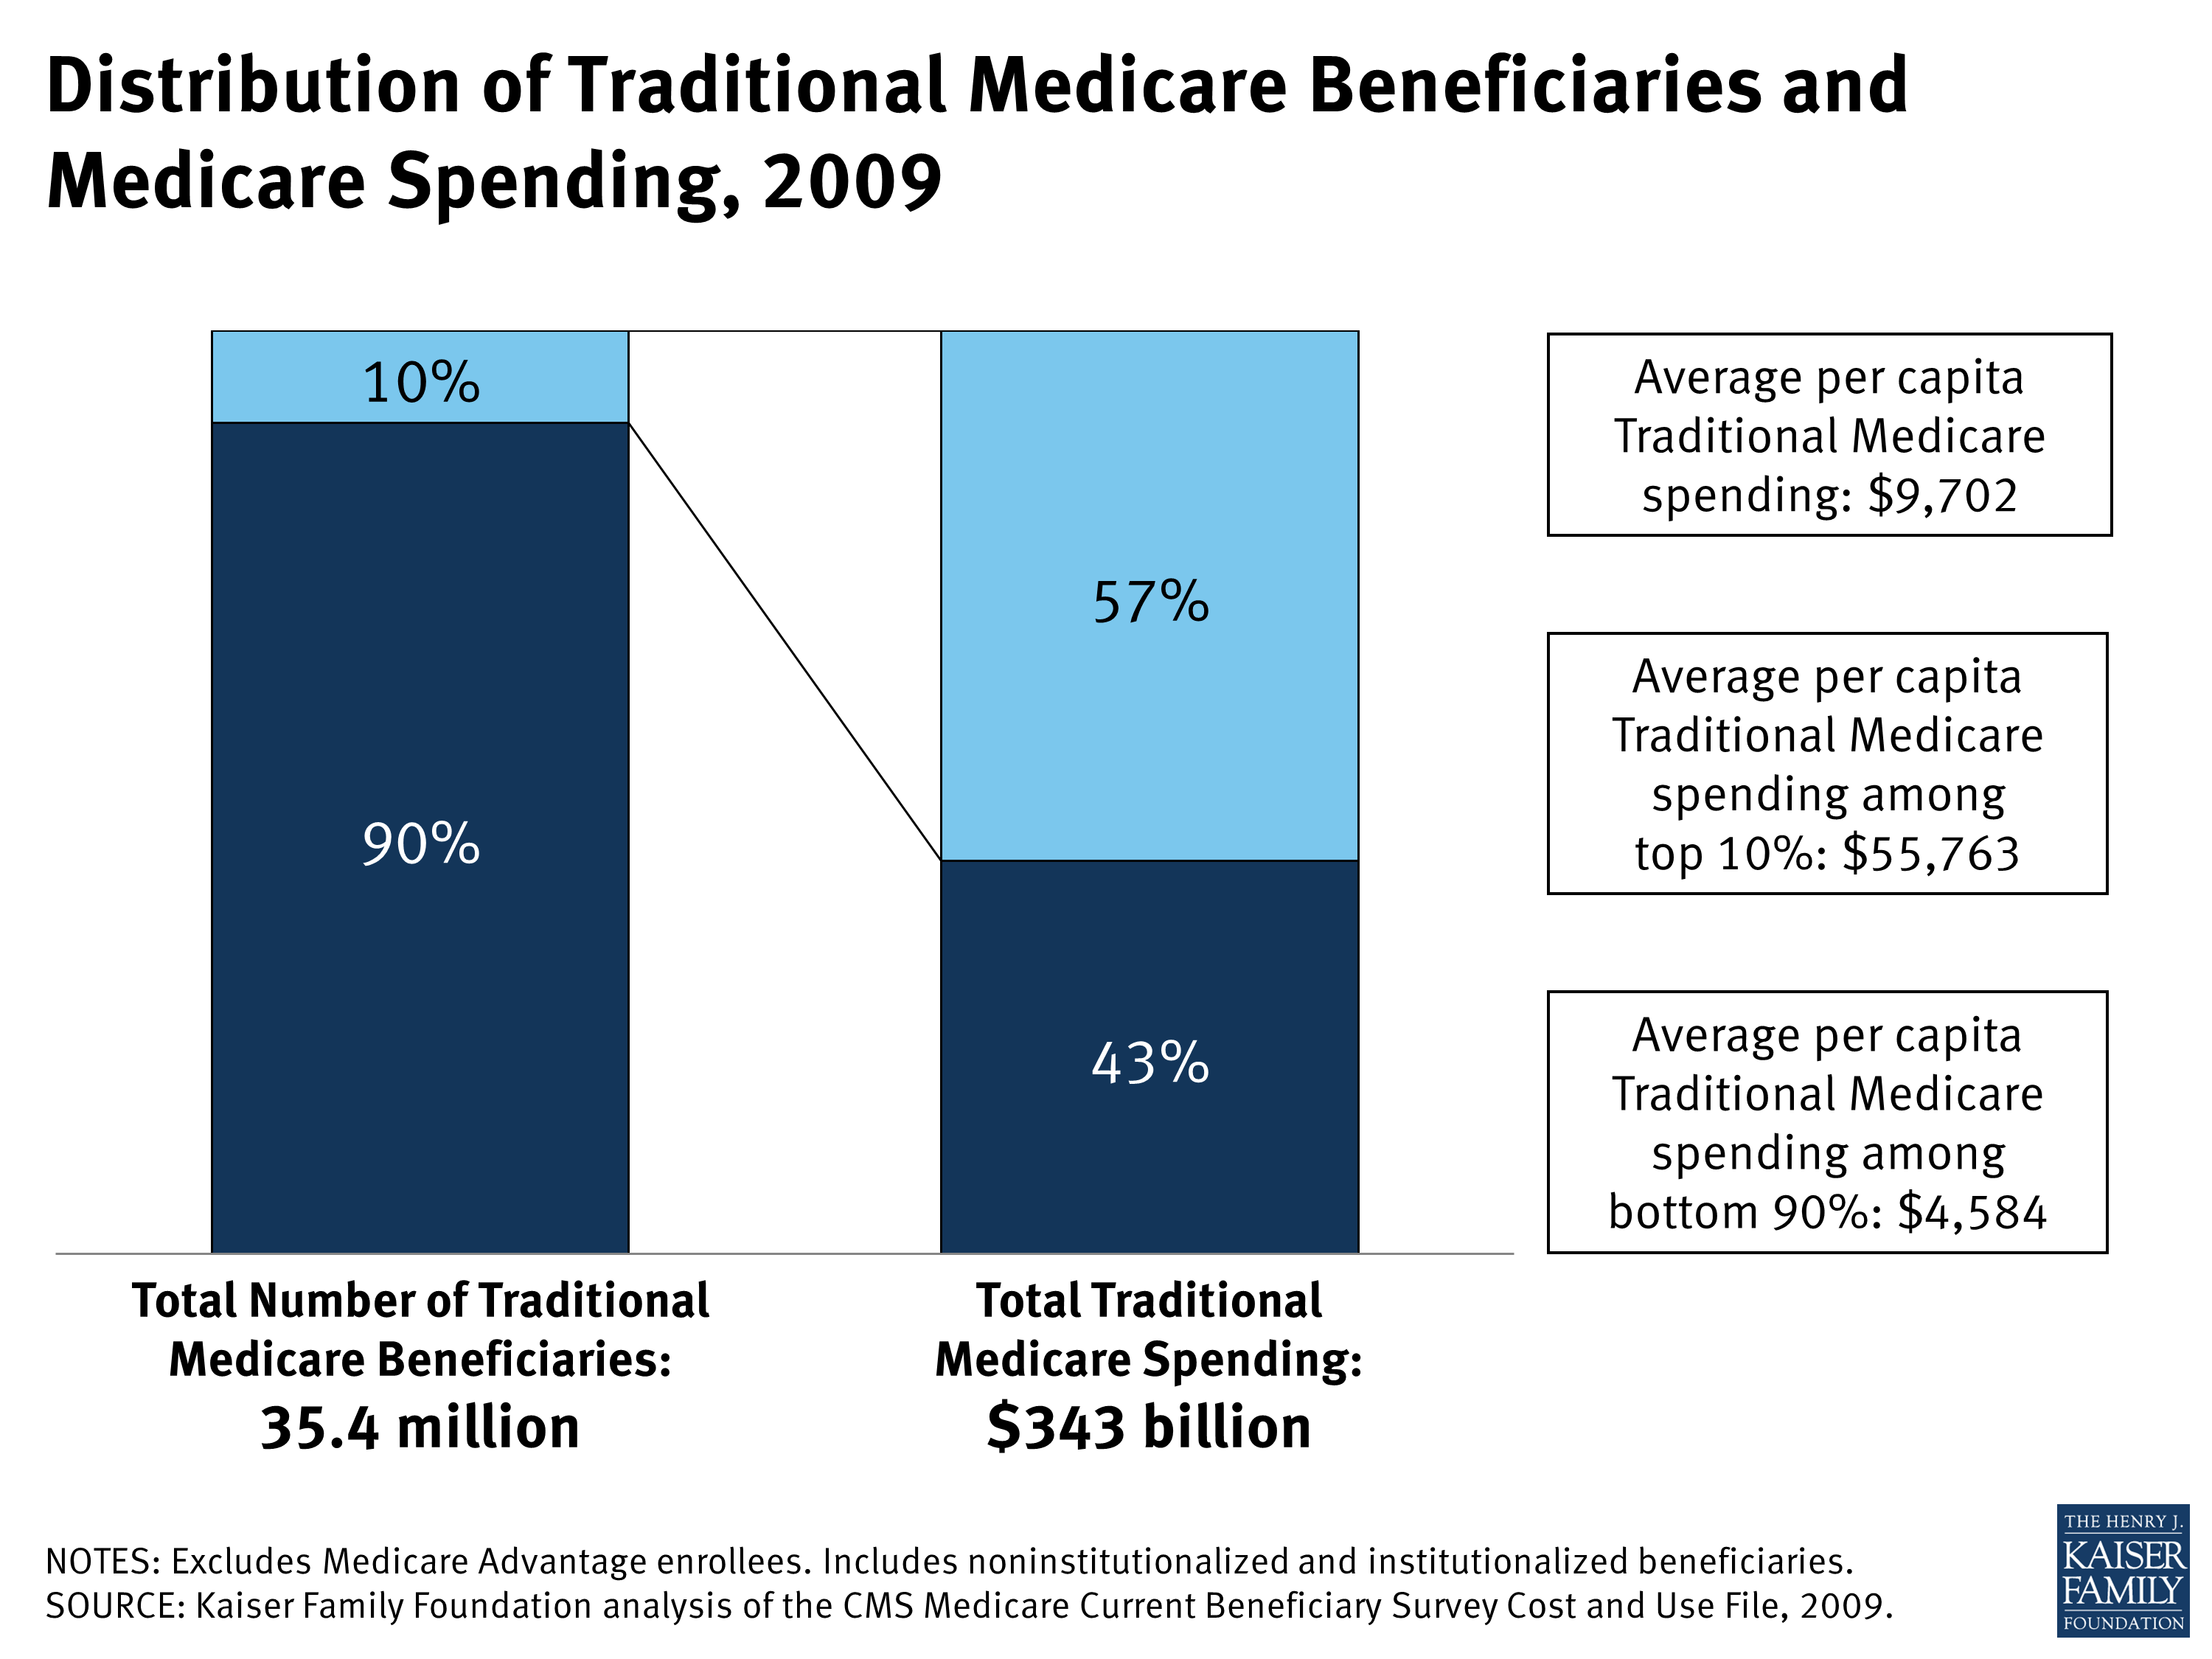 Distribution-of-Medicare-Beneficiaries-and-Spending-2009-Medicare | KFF